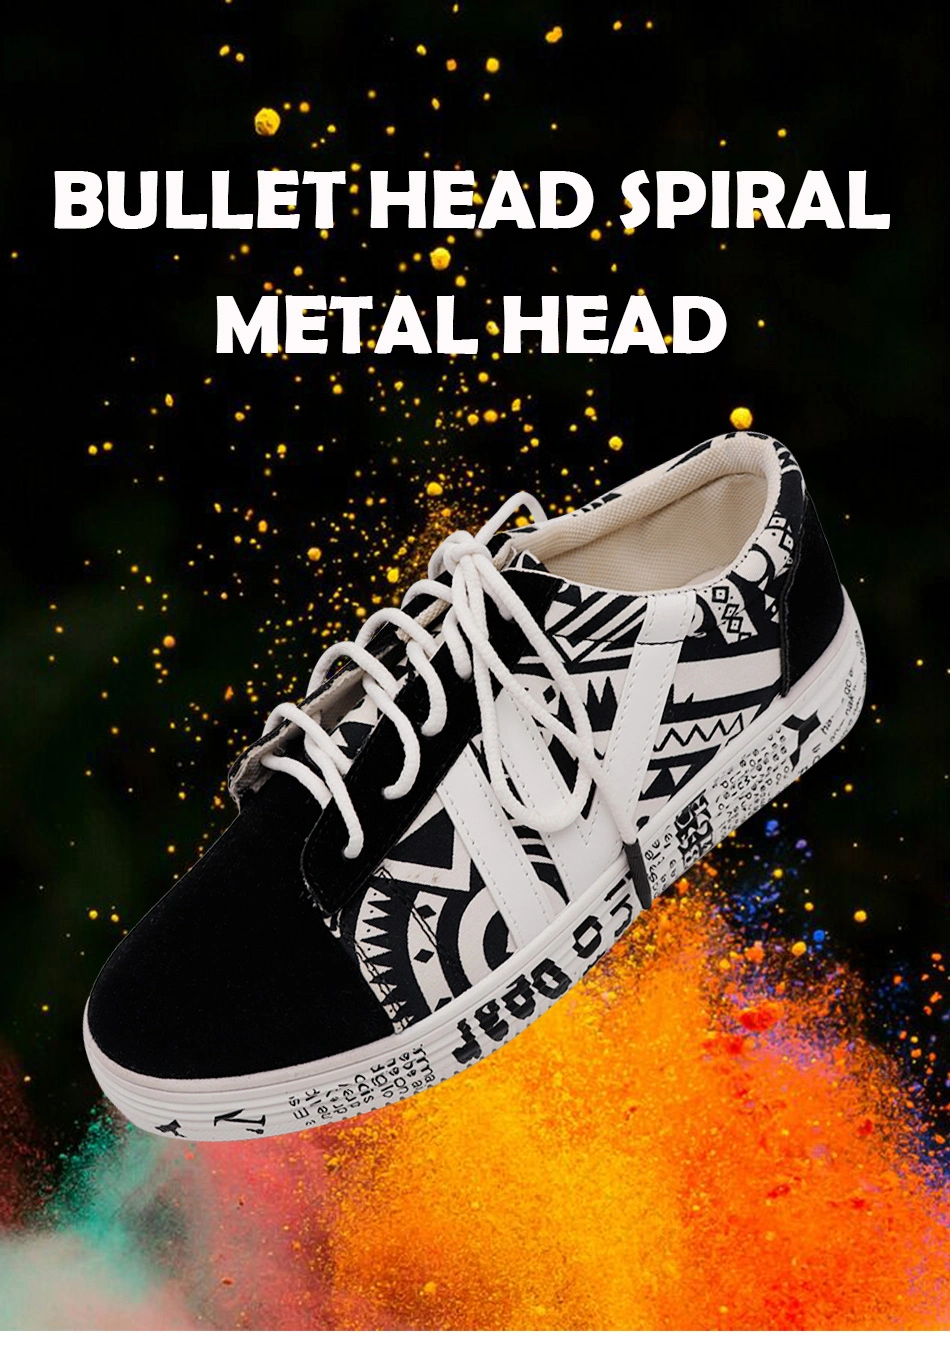 Weiou Manufacturer Hot Selling Metal Shoe Accessories Brand New Black White Bullet